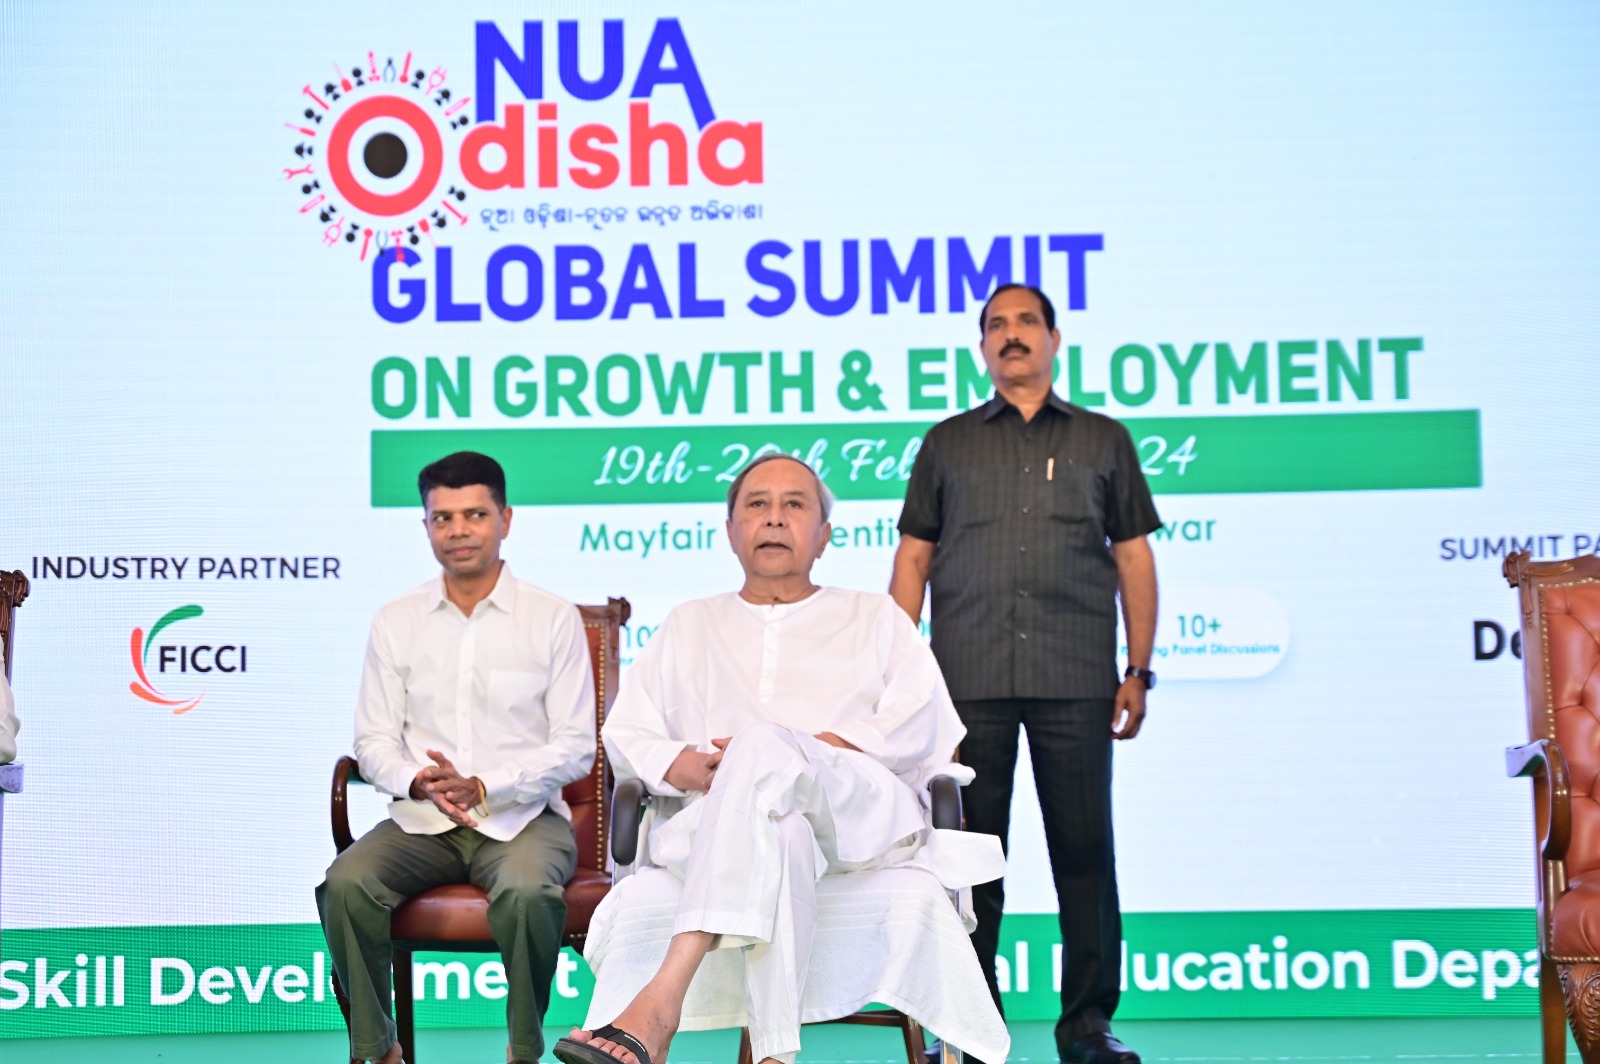 "Need to Prepare Youth for Future of Work": CM 